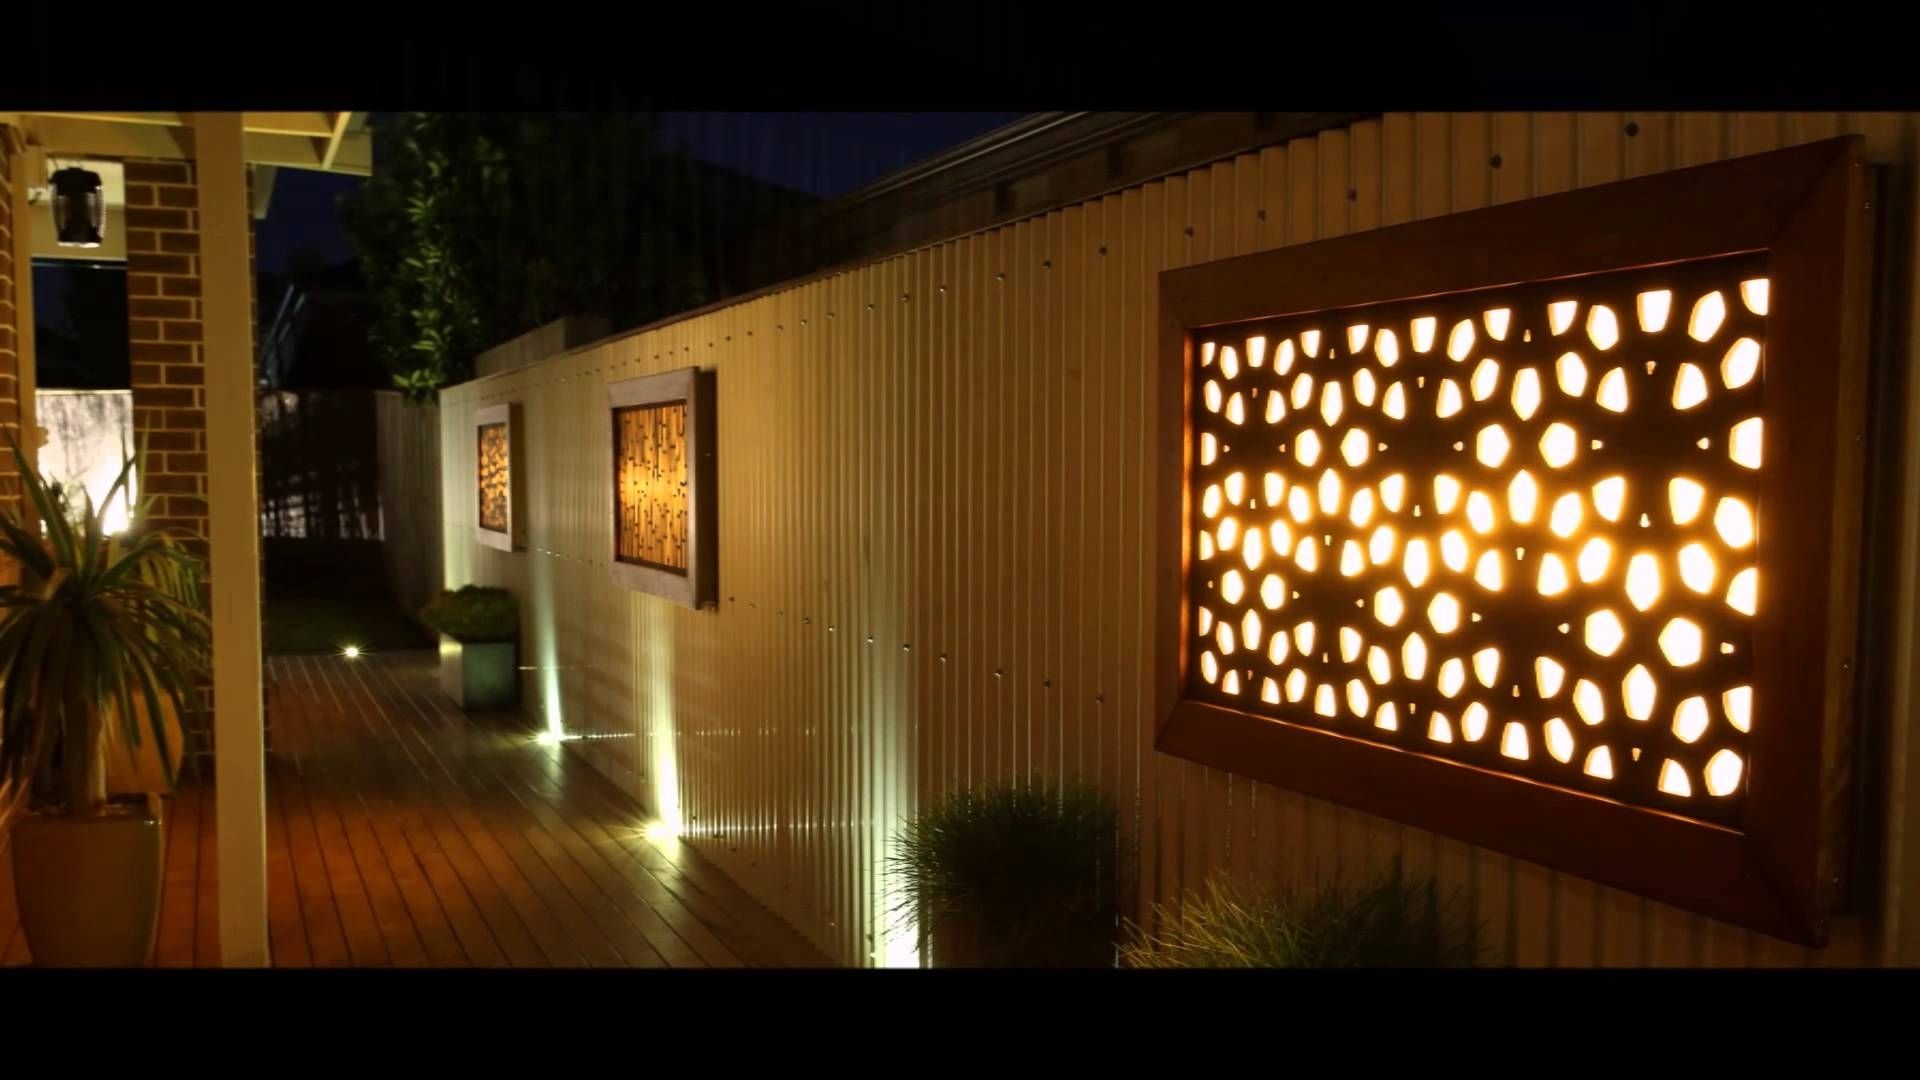 Fashionable Wall Light Box Art Intended For Litecrafts – Wall Art – Outdoor Feature Led – Light Boxes And (View 1 of 15)